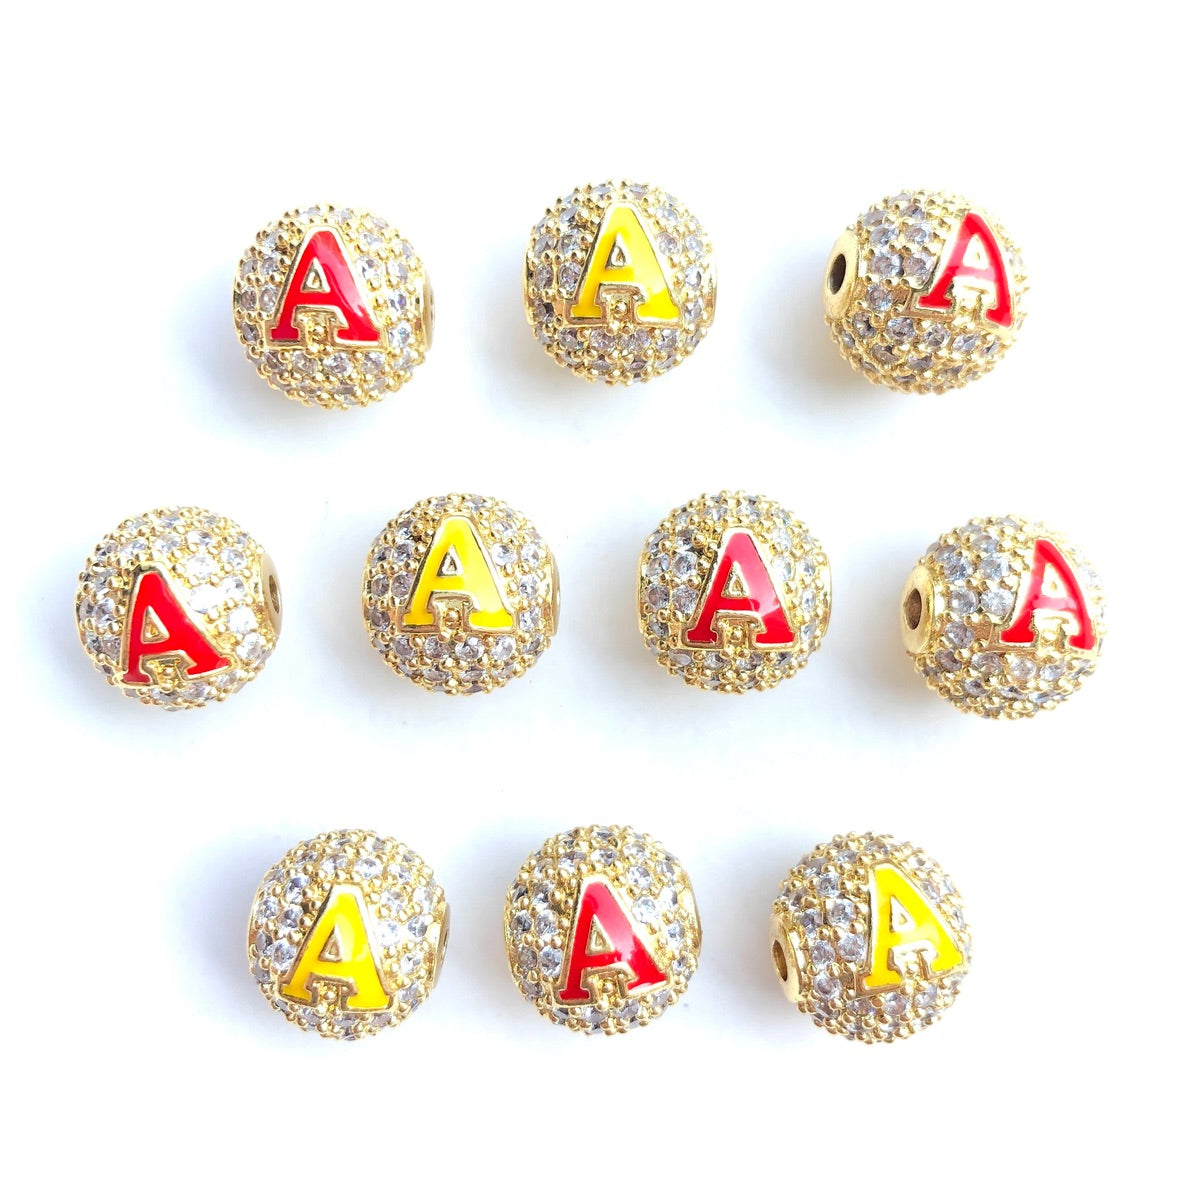 12pcs/lot 10mm Red Yellow Enamel CZ Paved Greek Letter "K", "A", "Ψ" Ball Spacers Beads 12 Gold A CZ Paved Spacers 10mm Beads Ball Beads Greek Letters New Spacers Arrivals Charms Beads Beyond